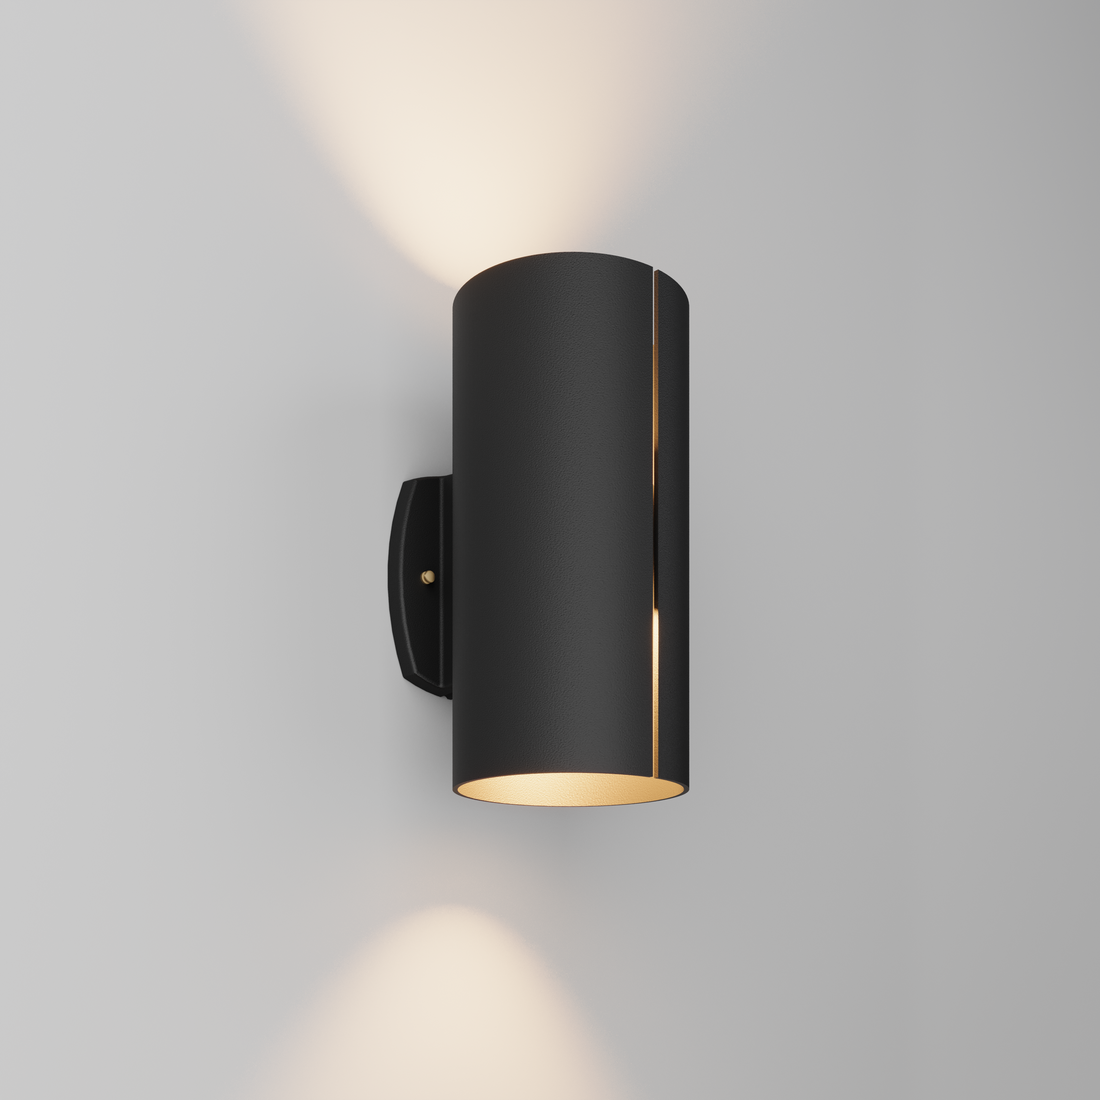 Evolution • Cylindrical outdoor wall light with slot [1842]